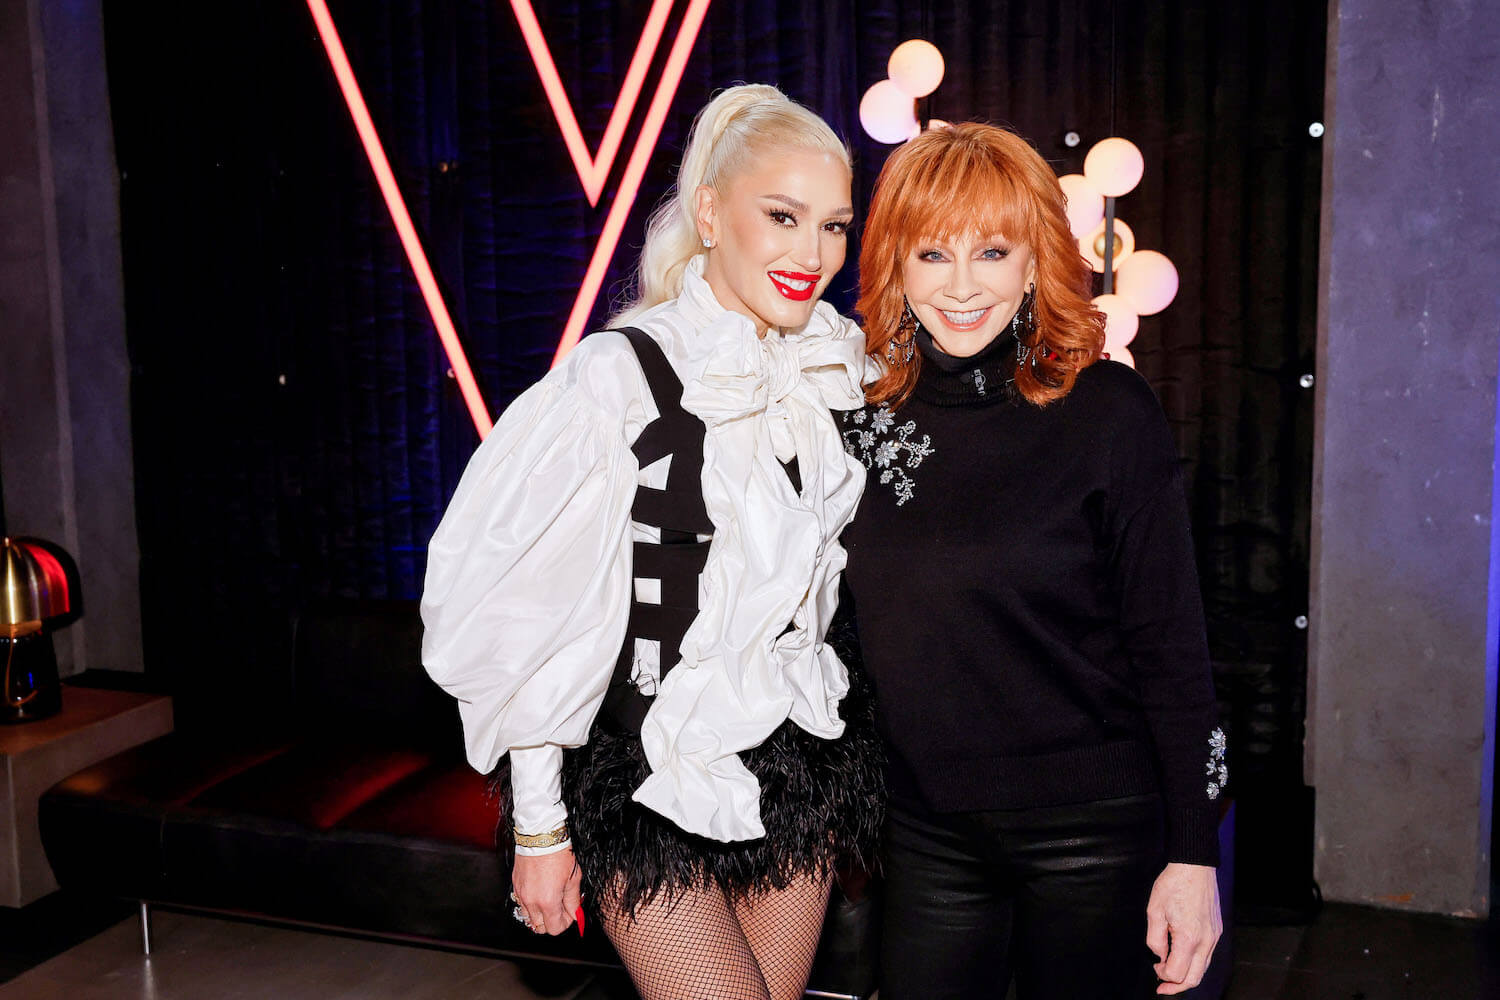 'The Voice' Season 24 stars Gwen Stefani and Reba McEntire smiling with their arms around each other